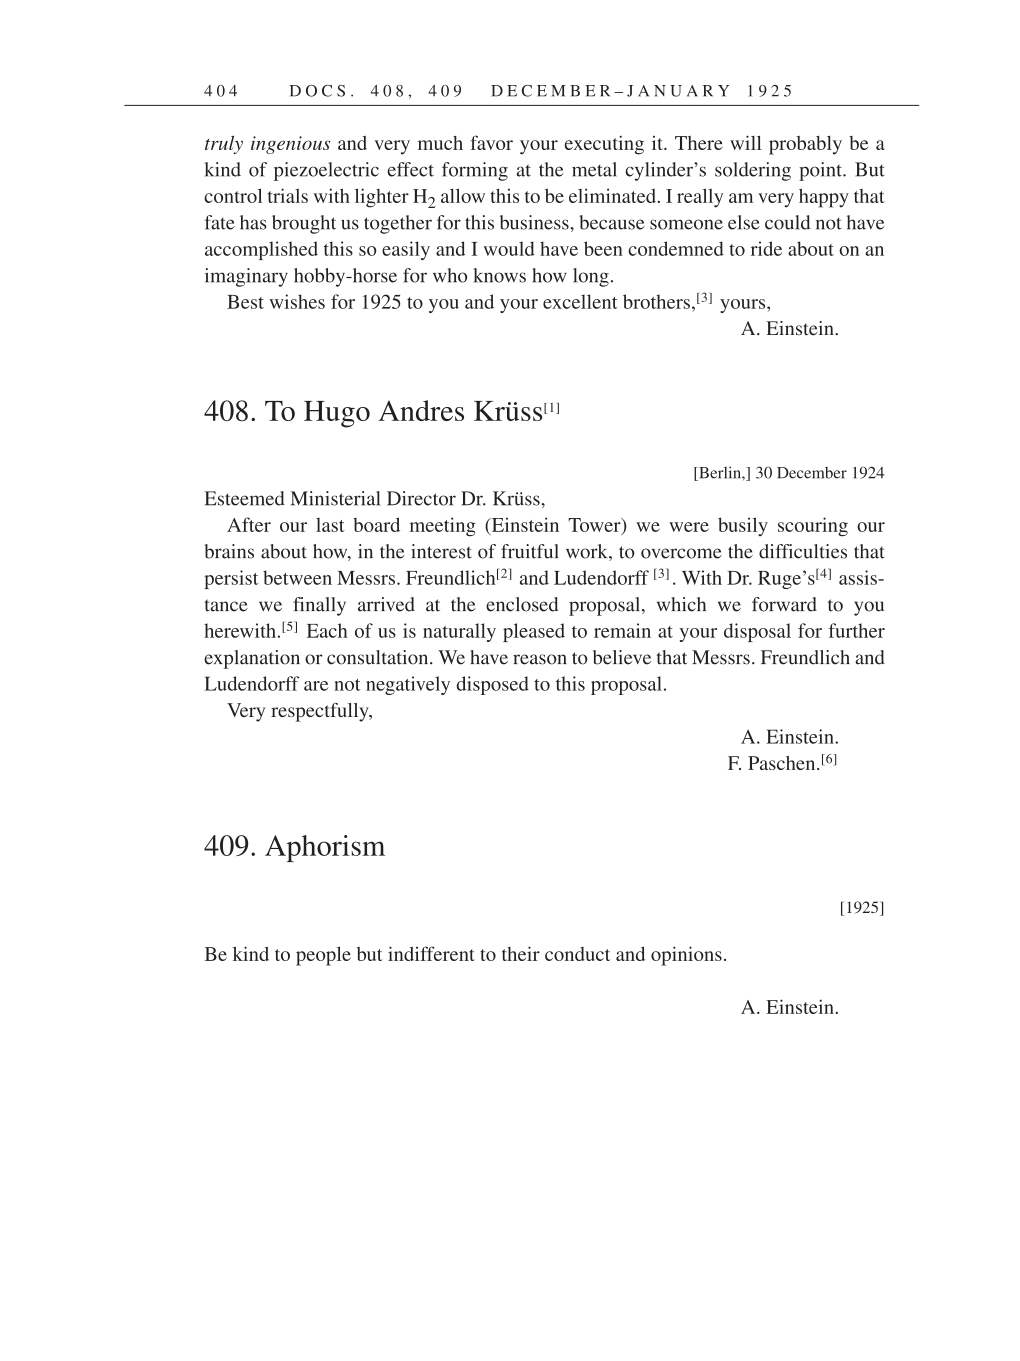 Volume 14: The Berlin Years: Writings & Correspondence, April 1923-May 1925 (English Translation Supplement) page 404